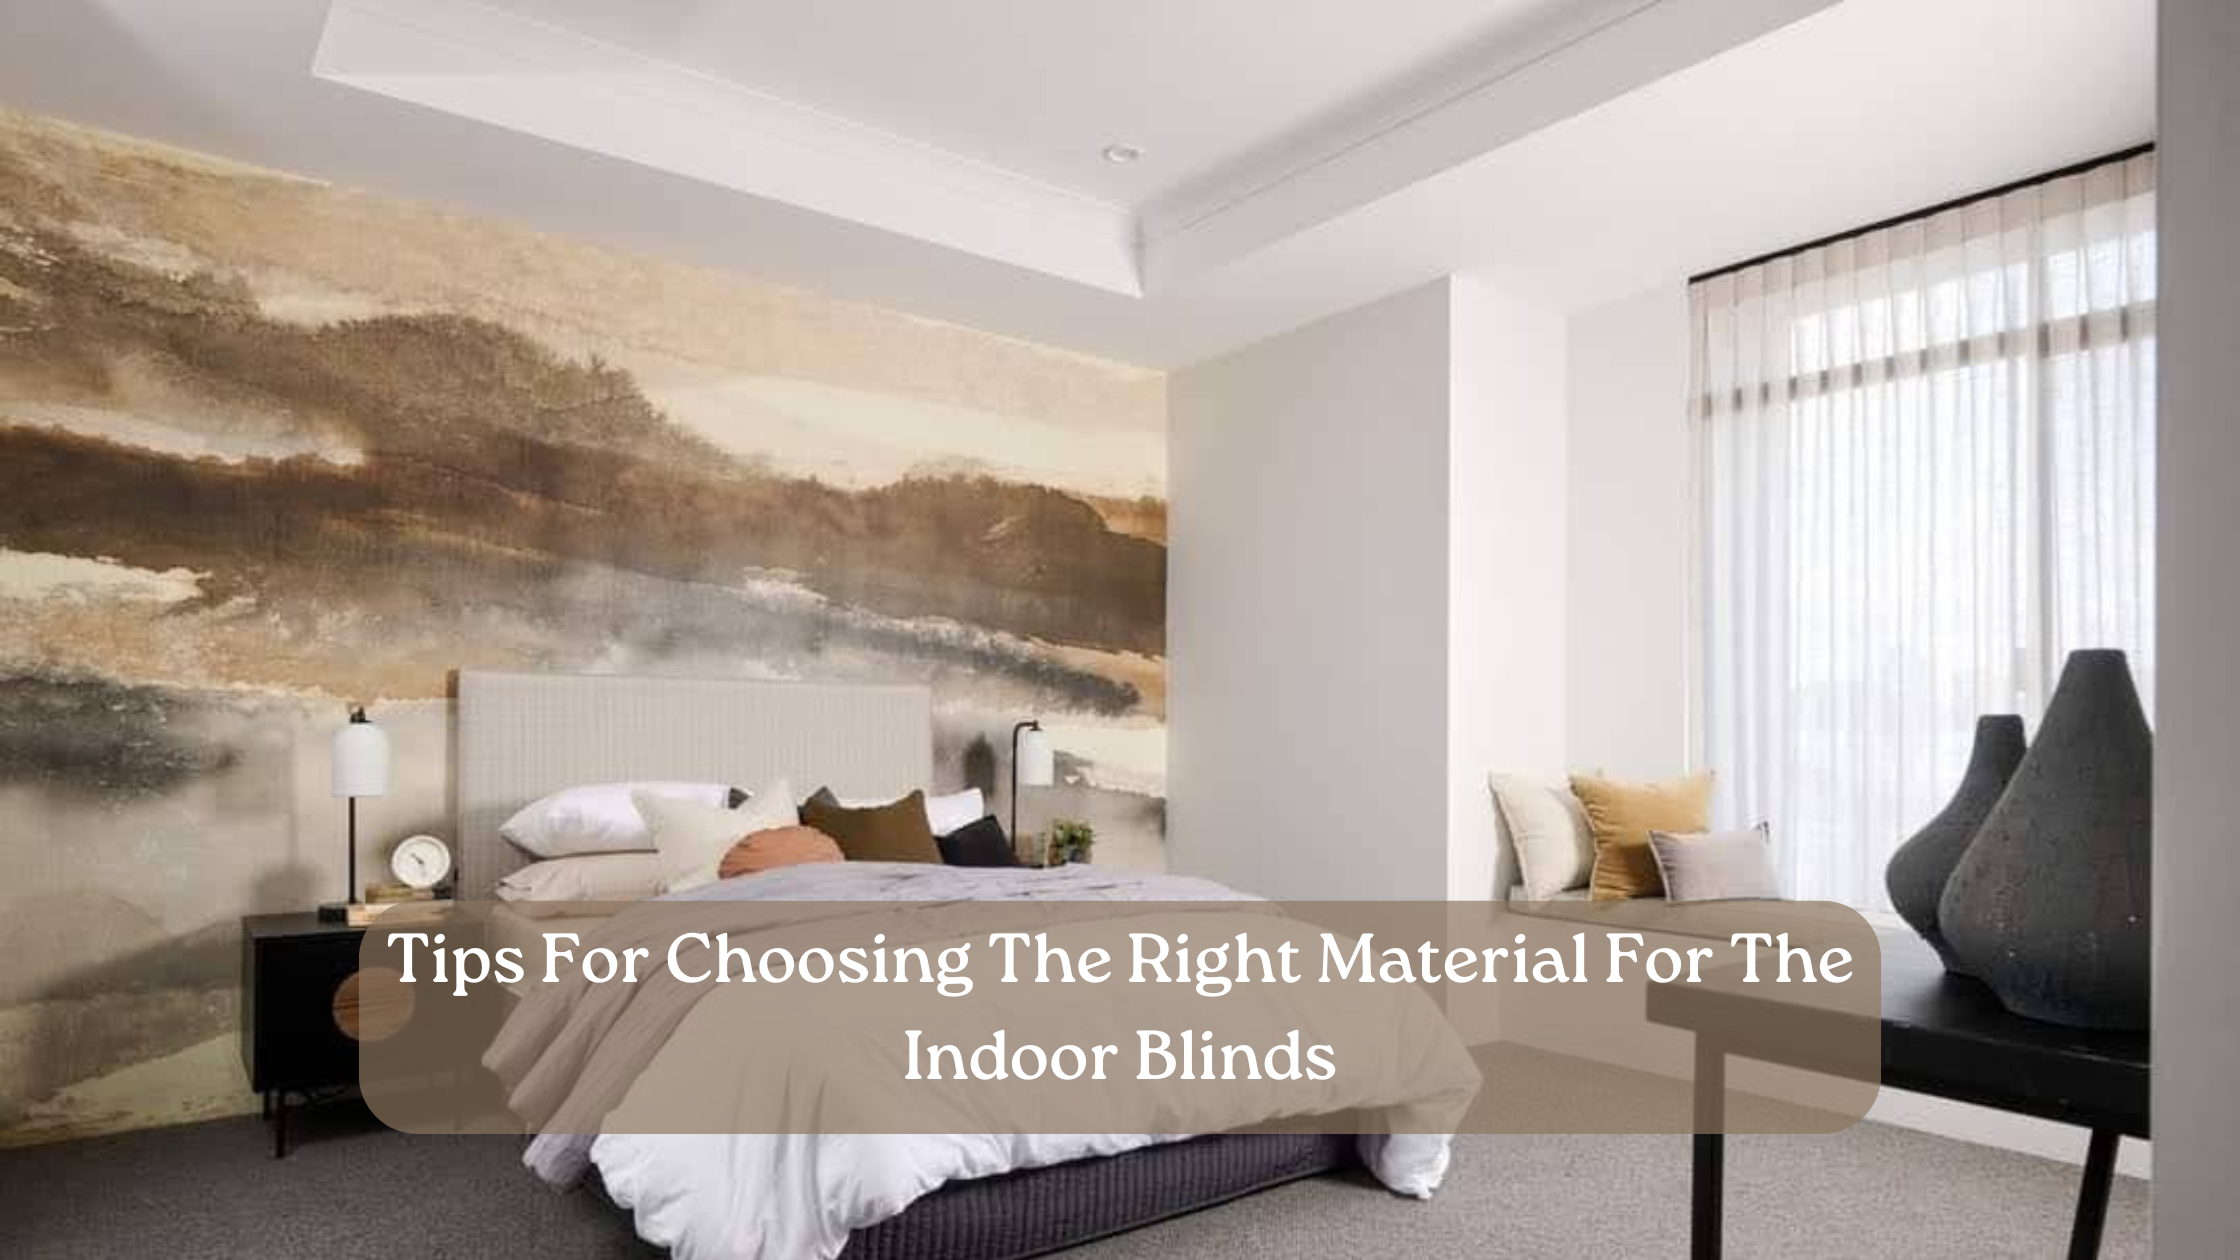 How To Choose The Best Material For Your Indoor Blinds?